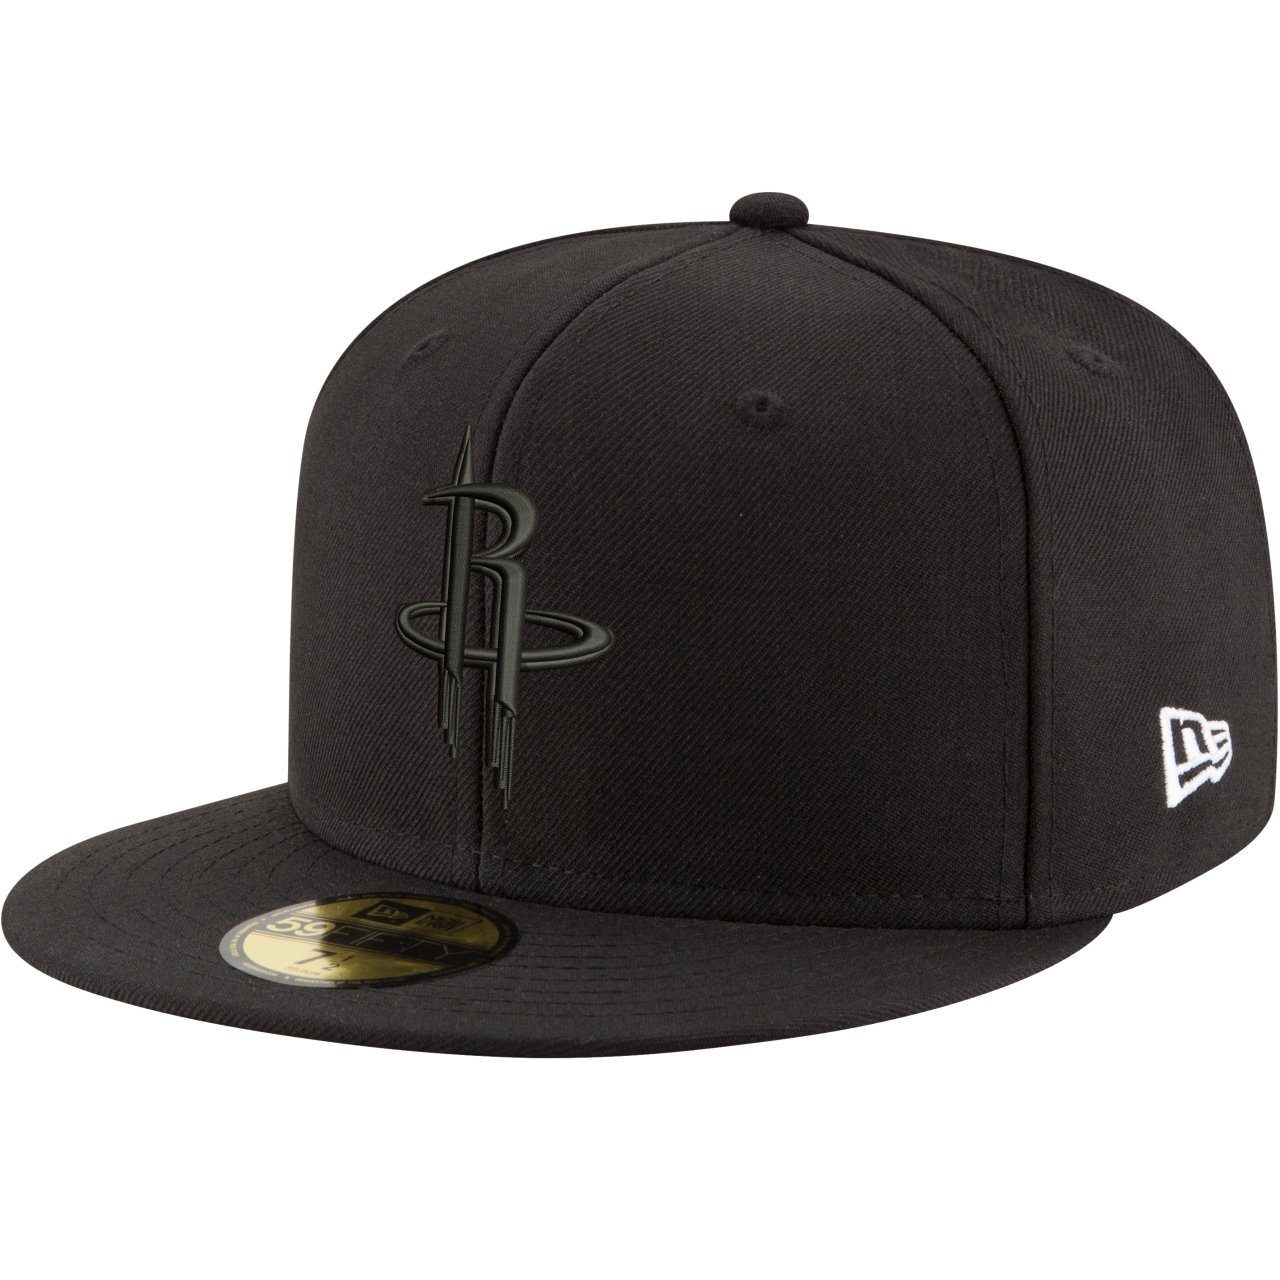 New Era Fitted Cap 59Fifty NBA Houston Rockets